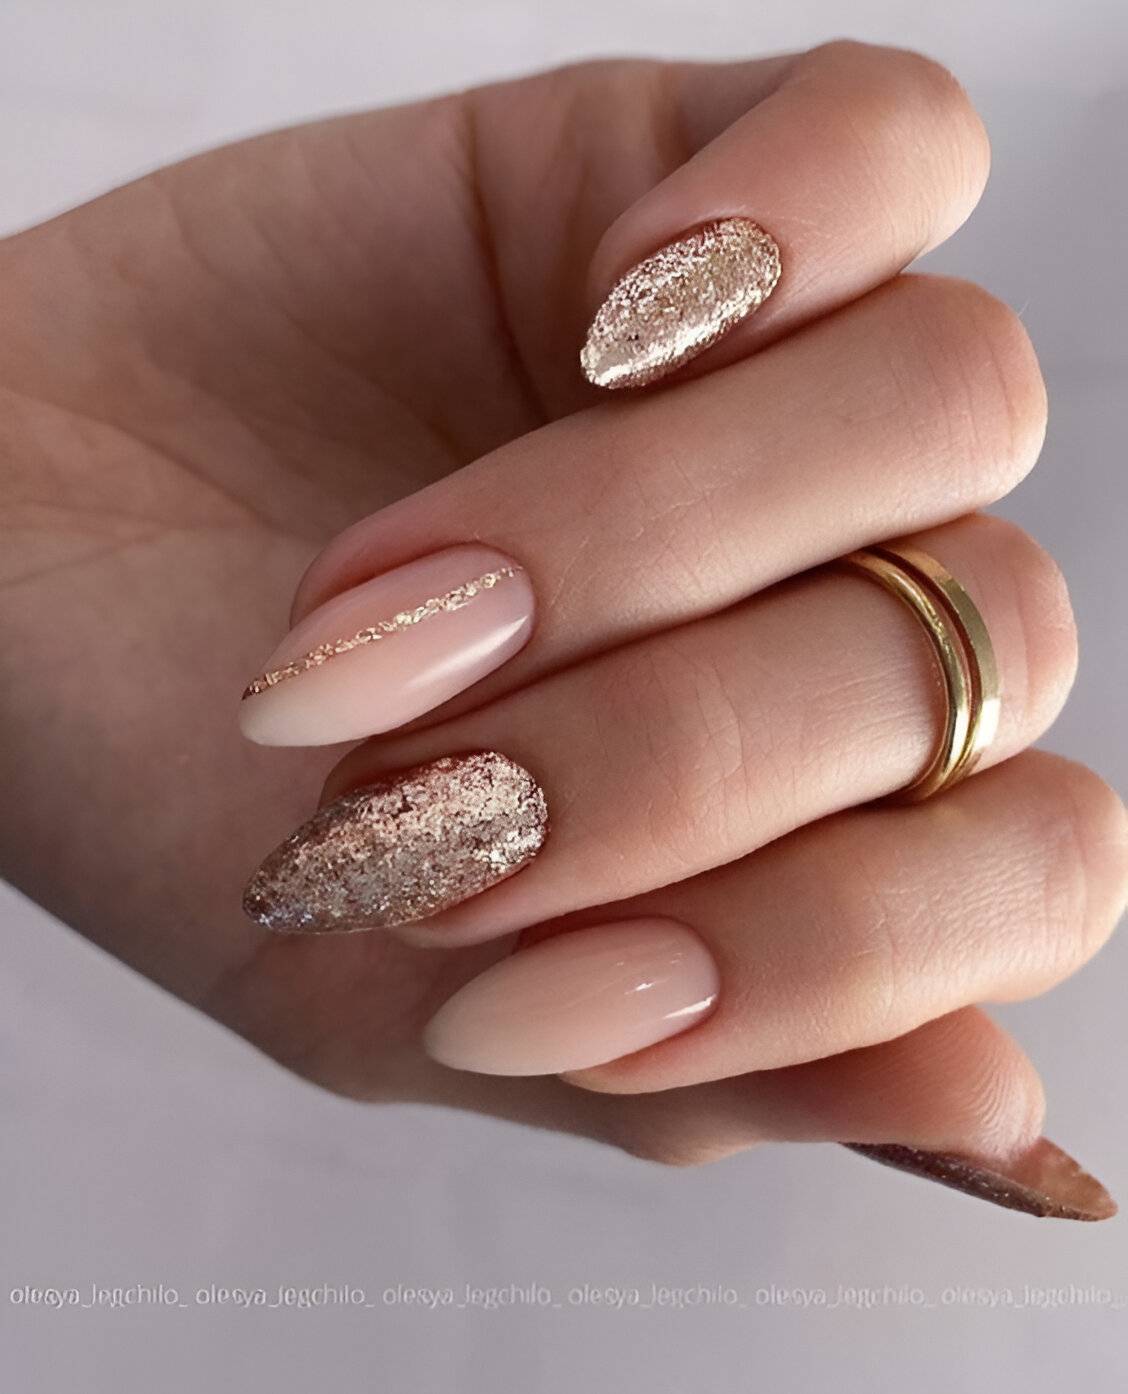 30 Drool-Worthy Short Almond Nail Ideas Every Chic Lady Needs - 227